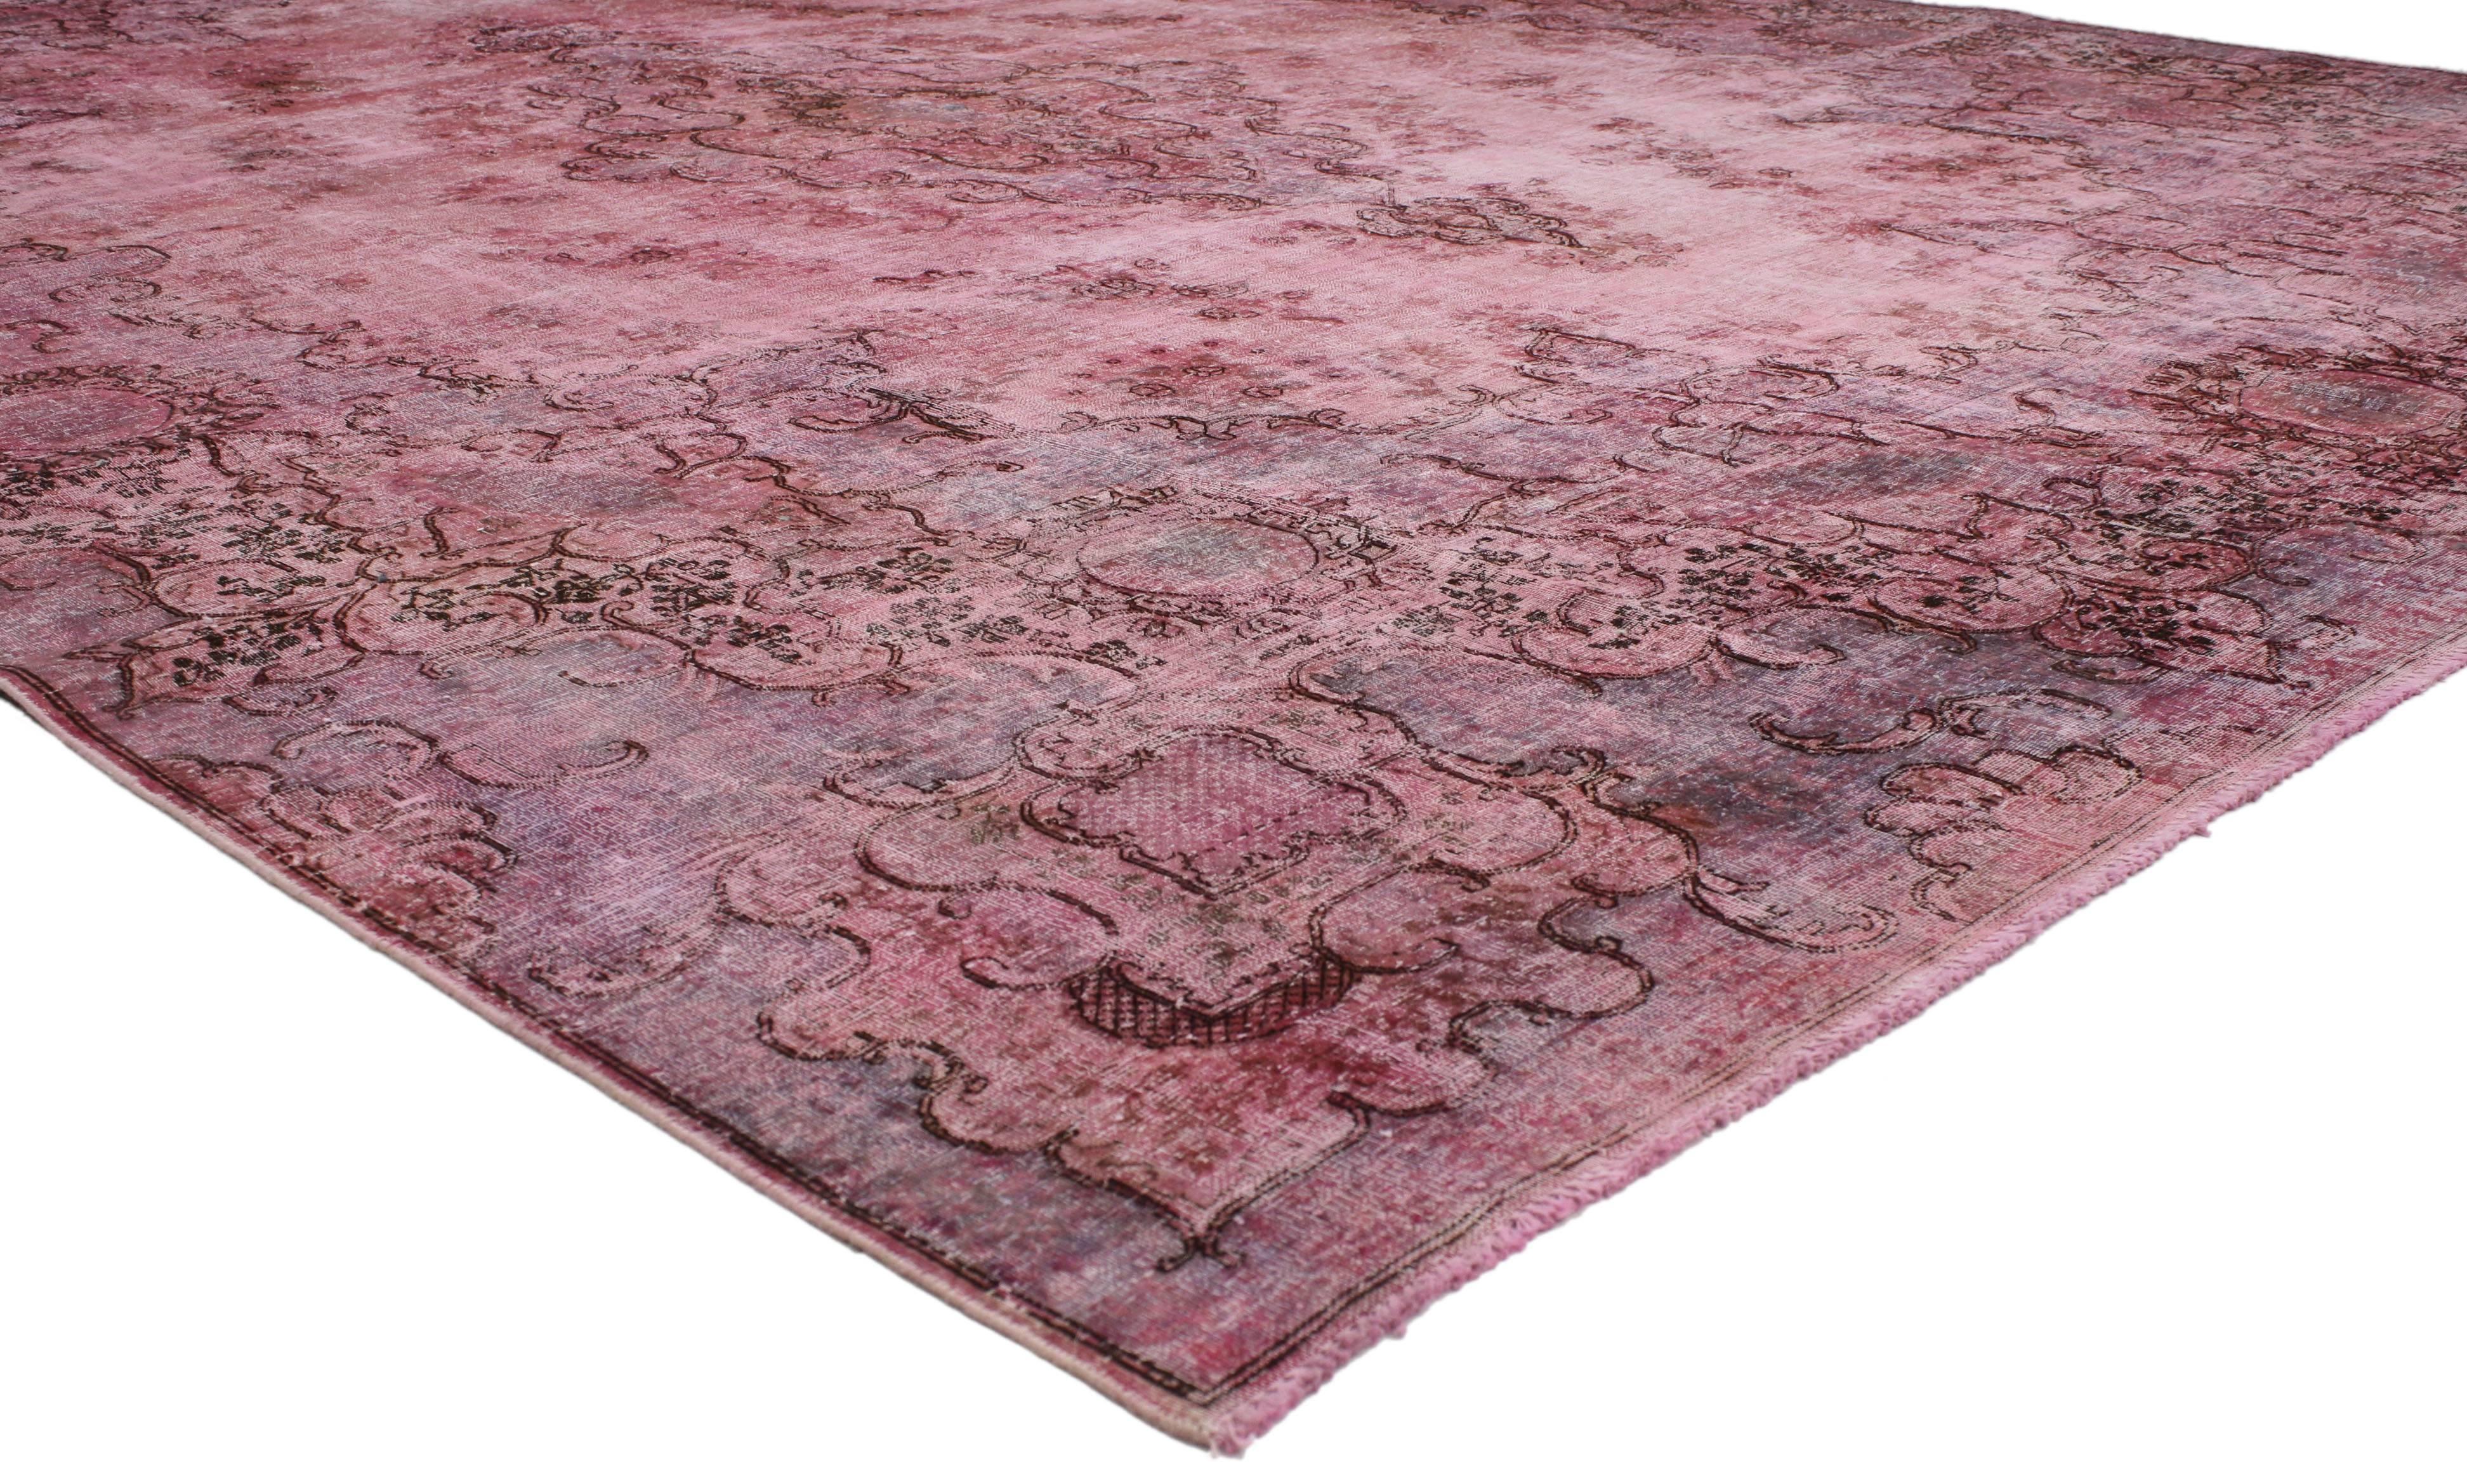 80412 Distressed Pink Overdyed Vintage Persian Rug with Modern Industrial Style. This breathtaking distressed pink overdyed vintage Persian rug with modern industrial style highlights a simplistic yet enchanting design, contributing to its